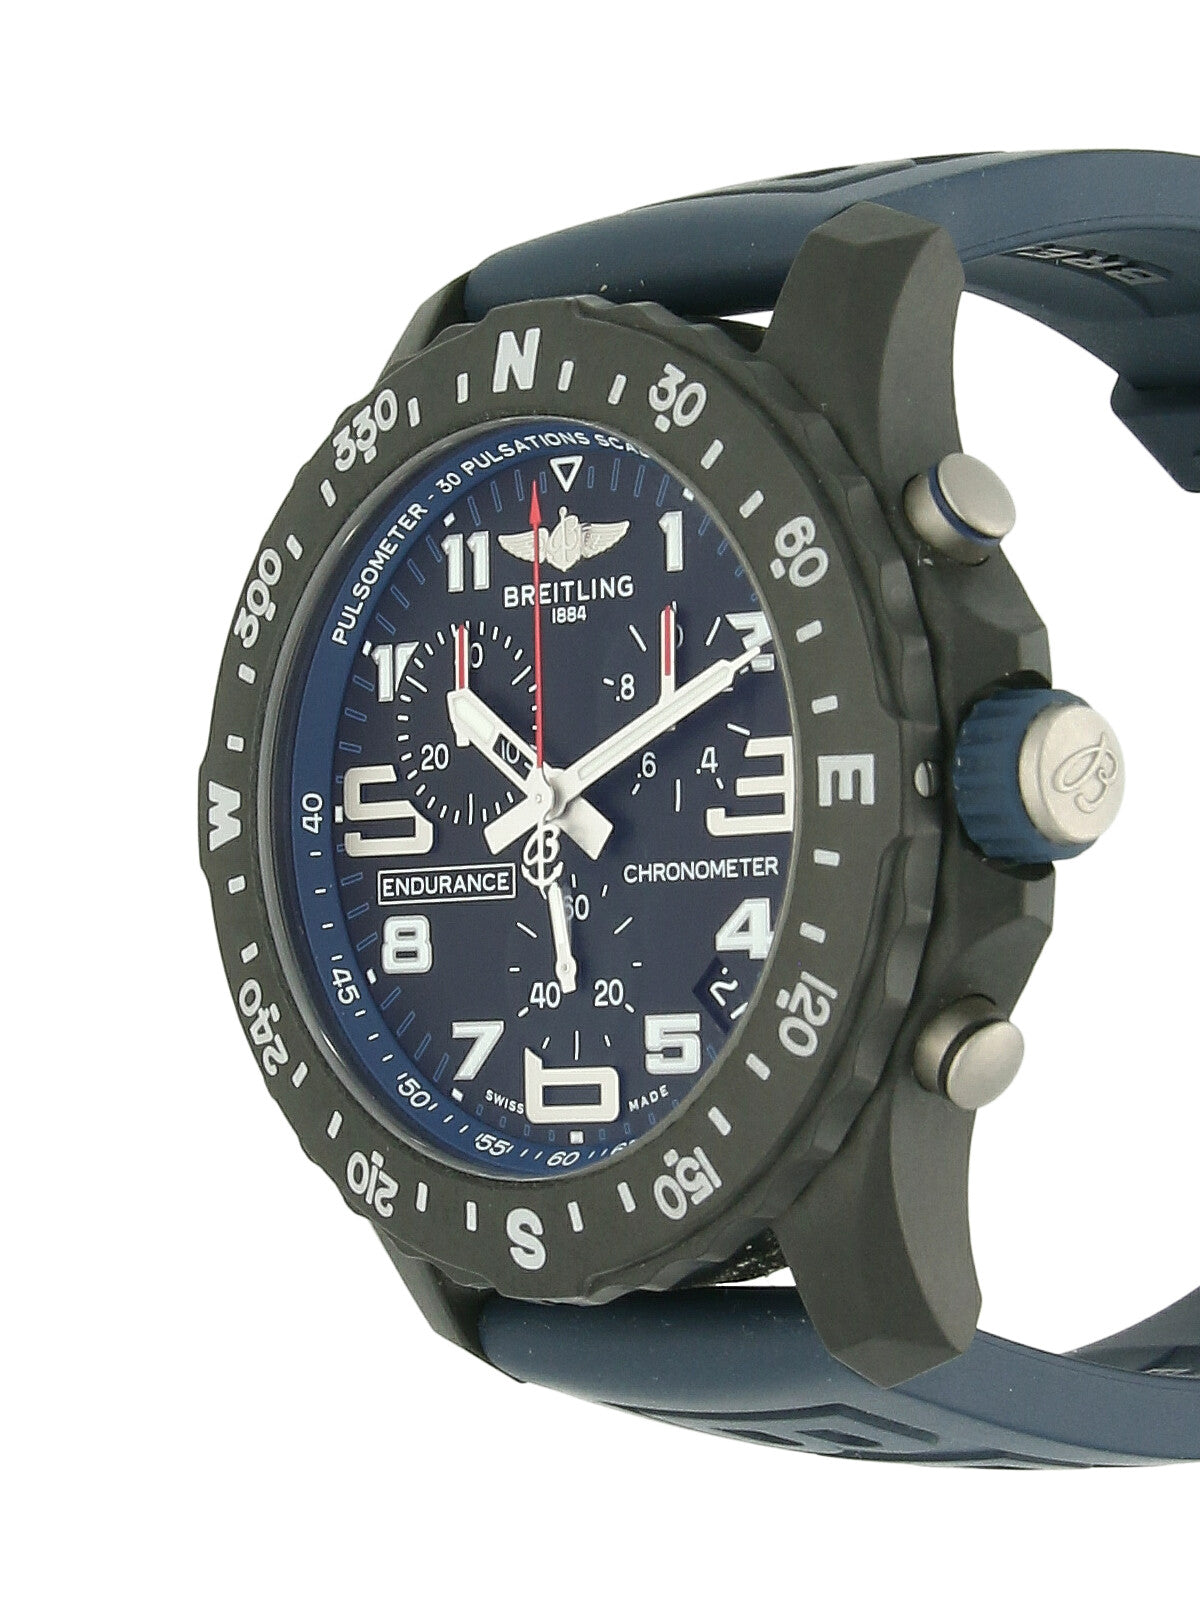 Pre Owned Breitling Endurance Pro Watch on Rubber Strap